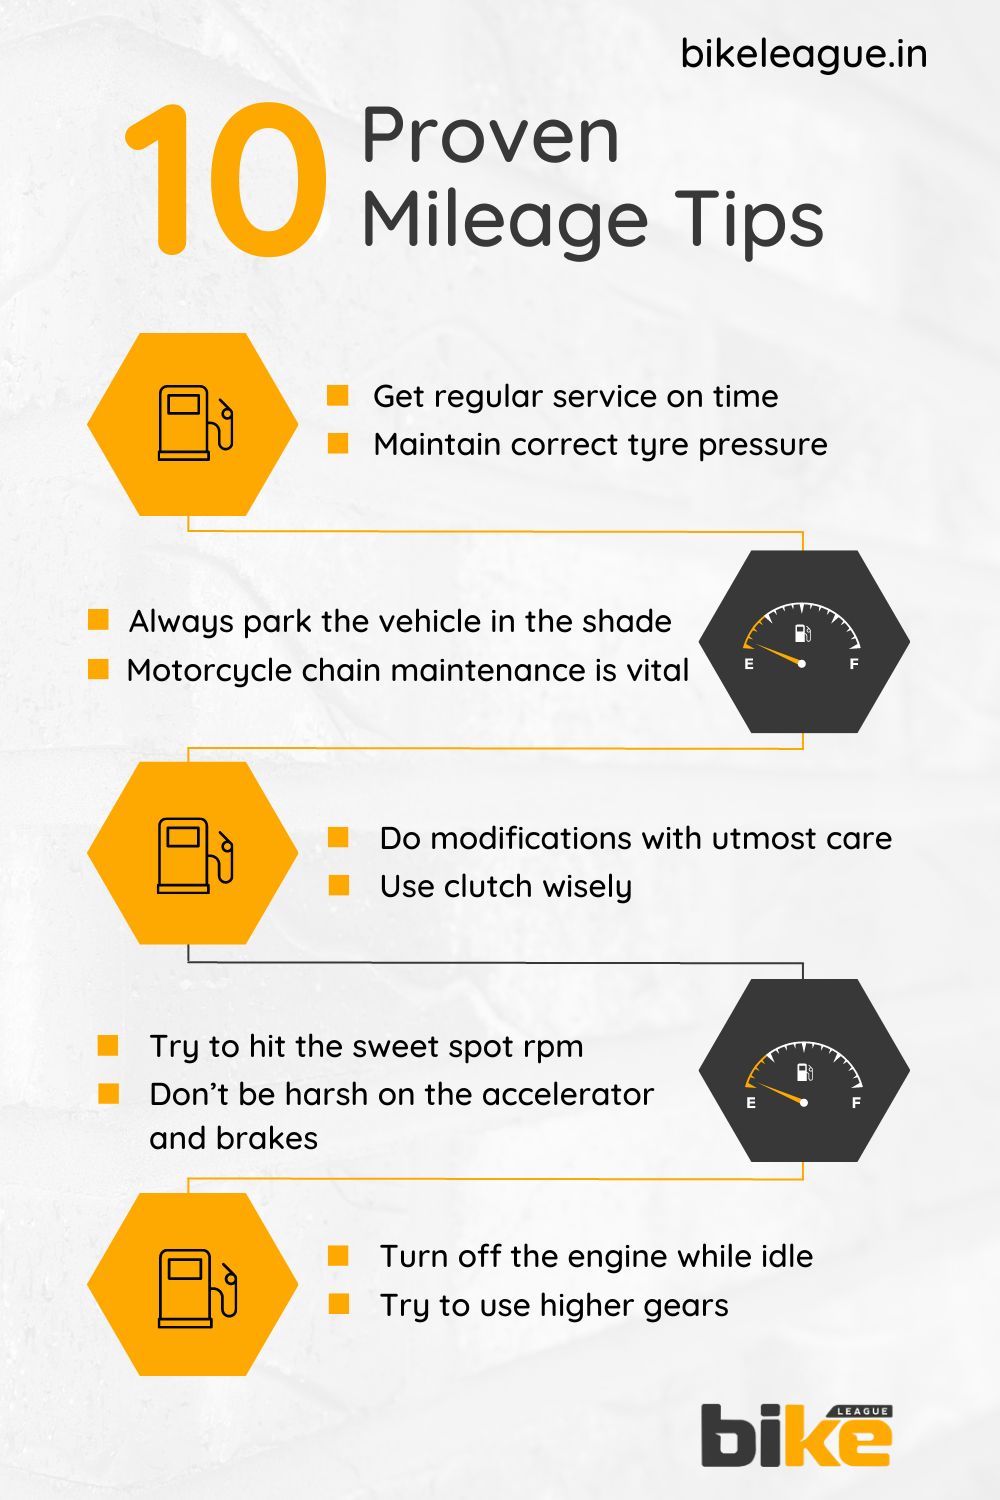 Top 10 Mileage Tips